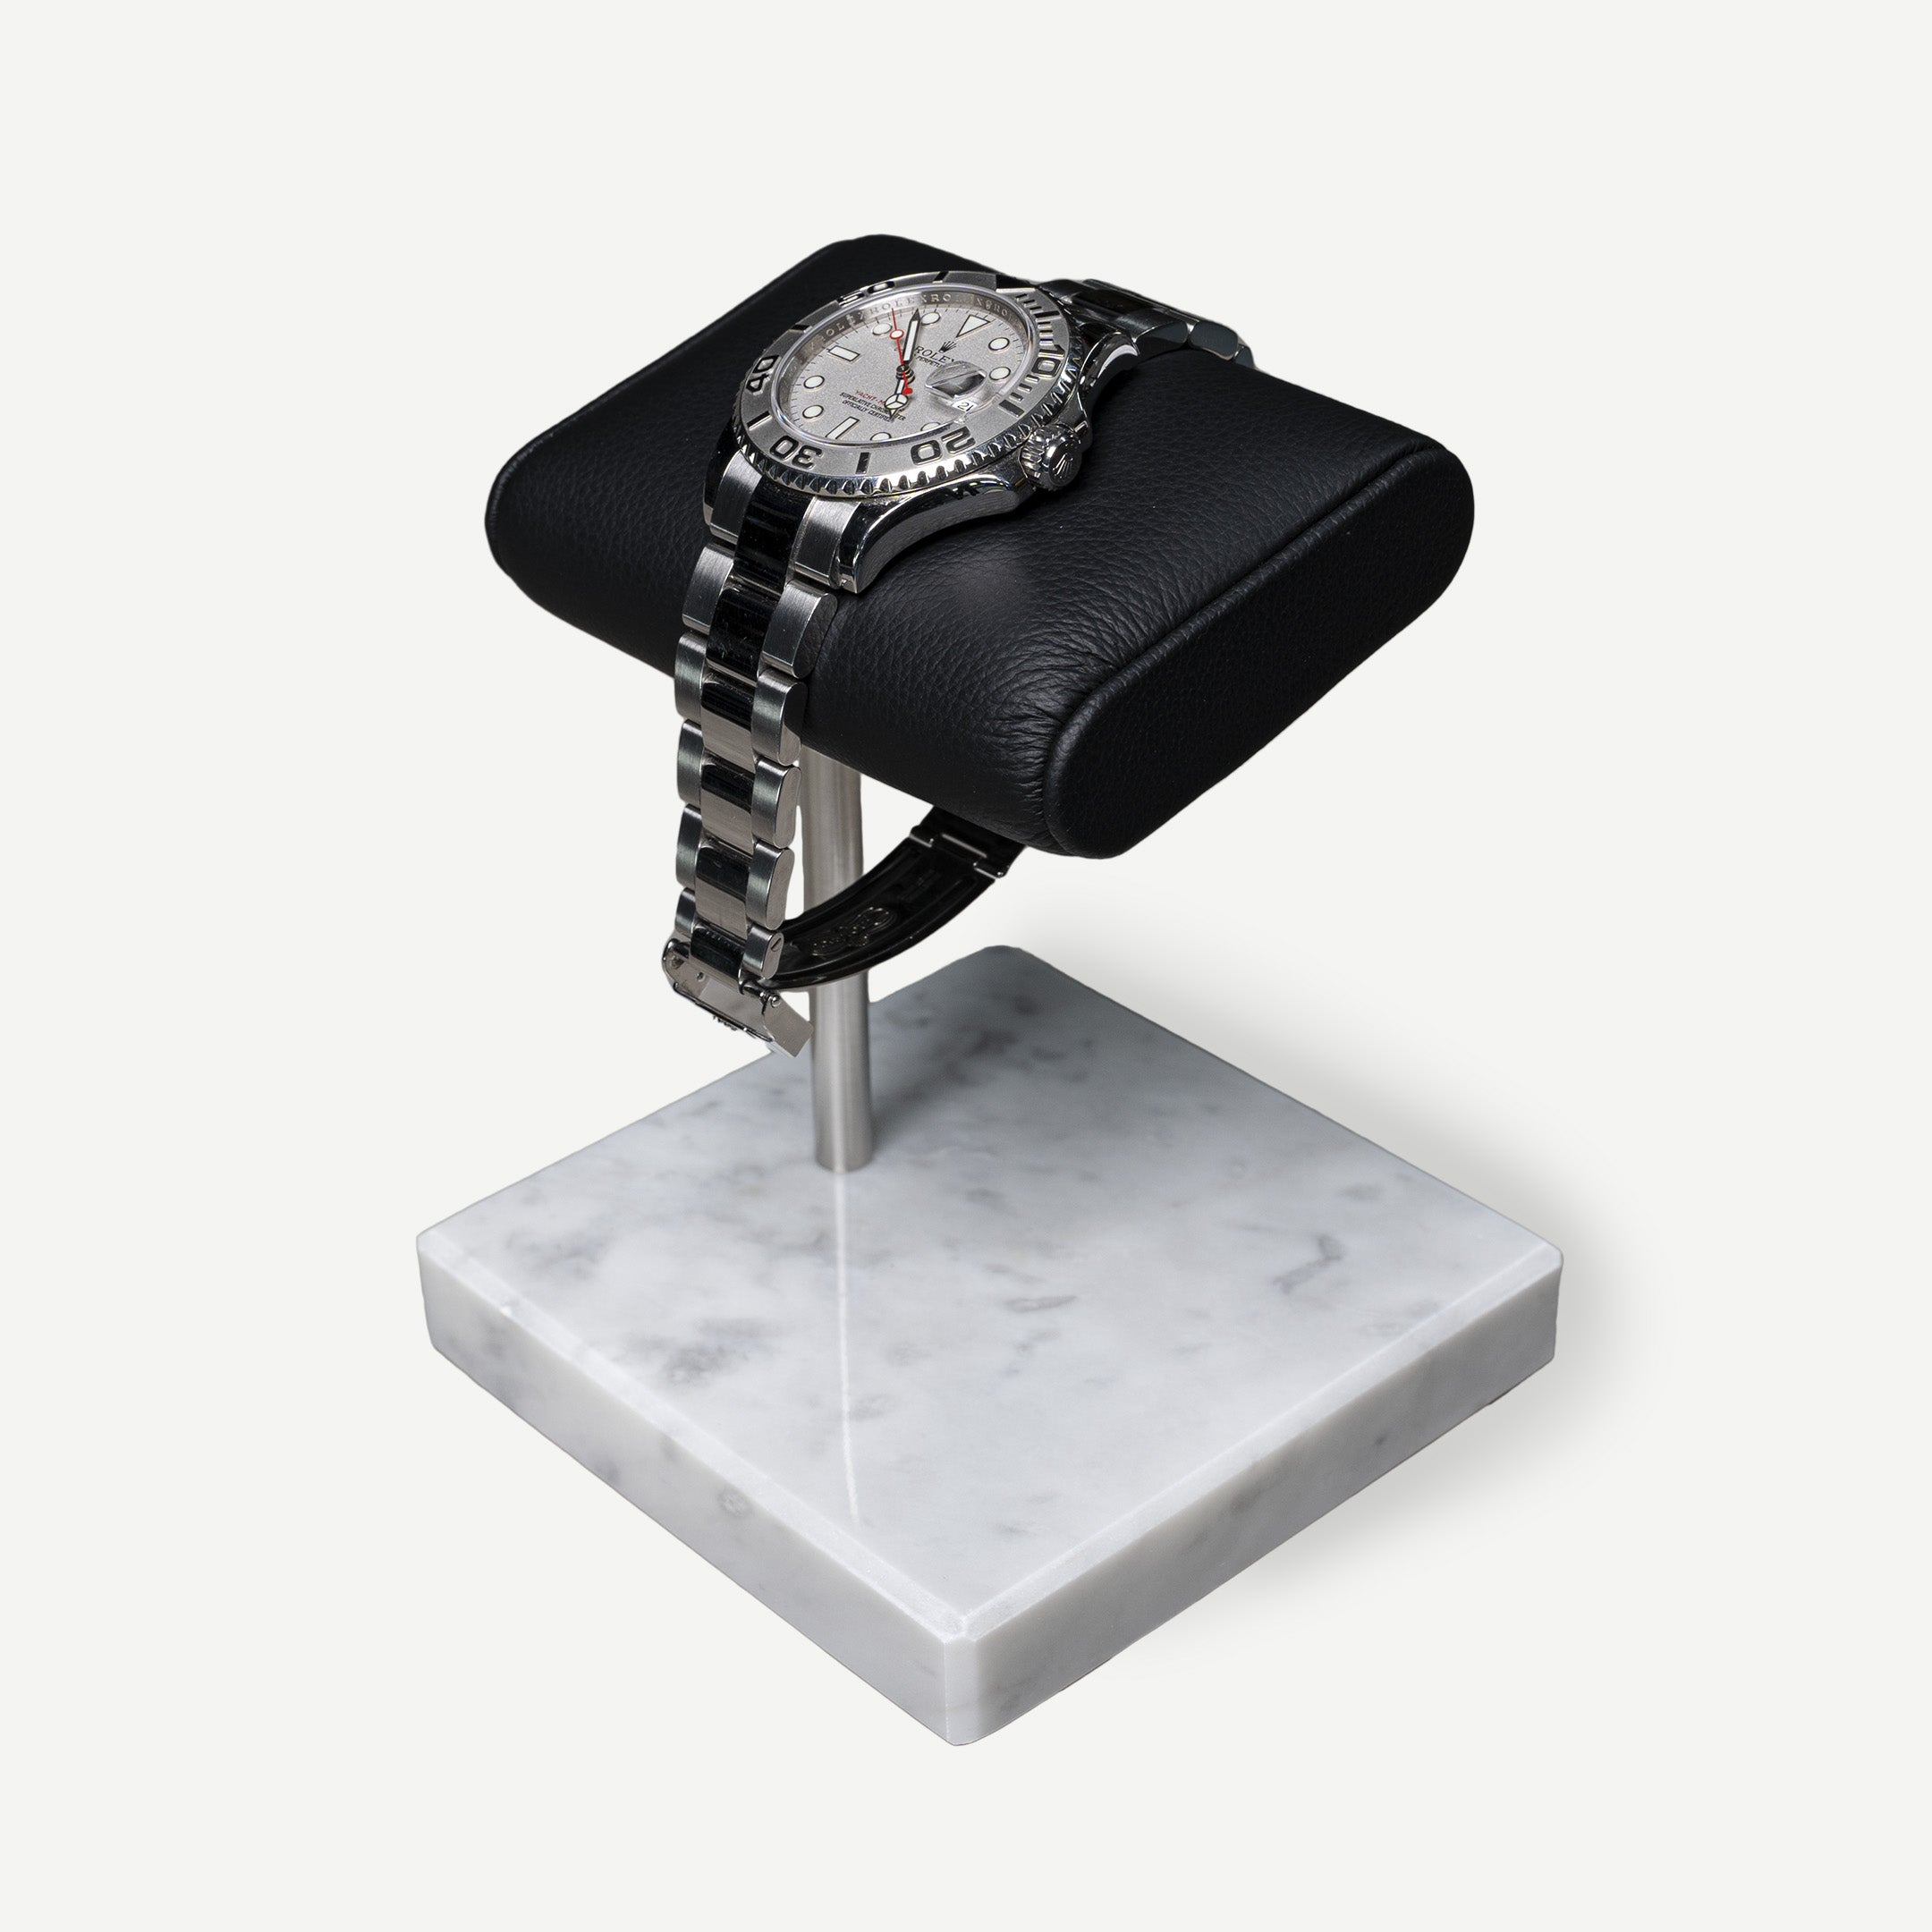 watch stand white marble black cusion, italian calfskin leather, carrara marble base plate, watch display, how to display your watches